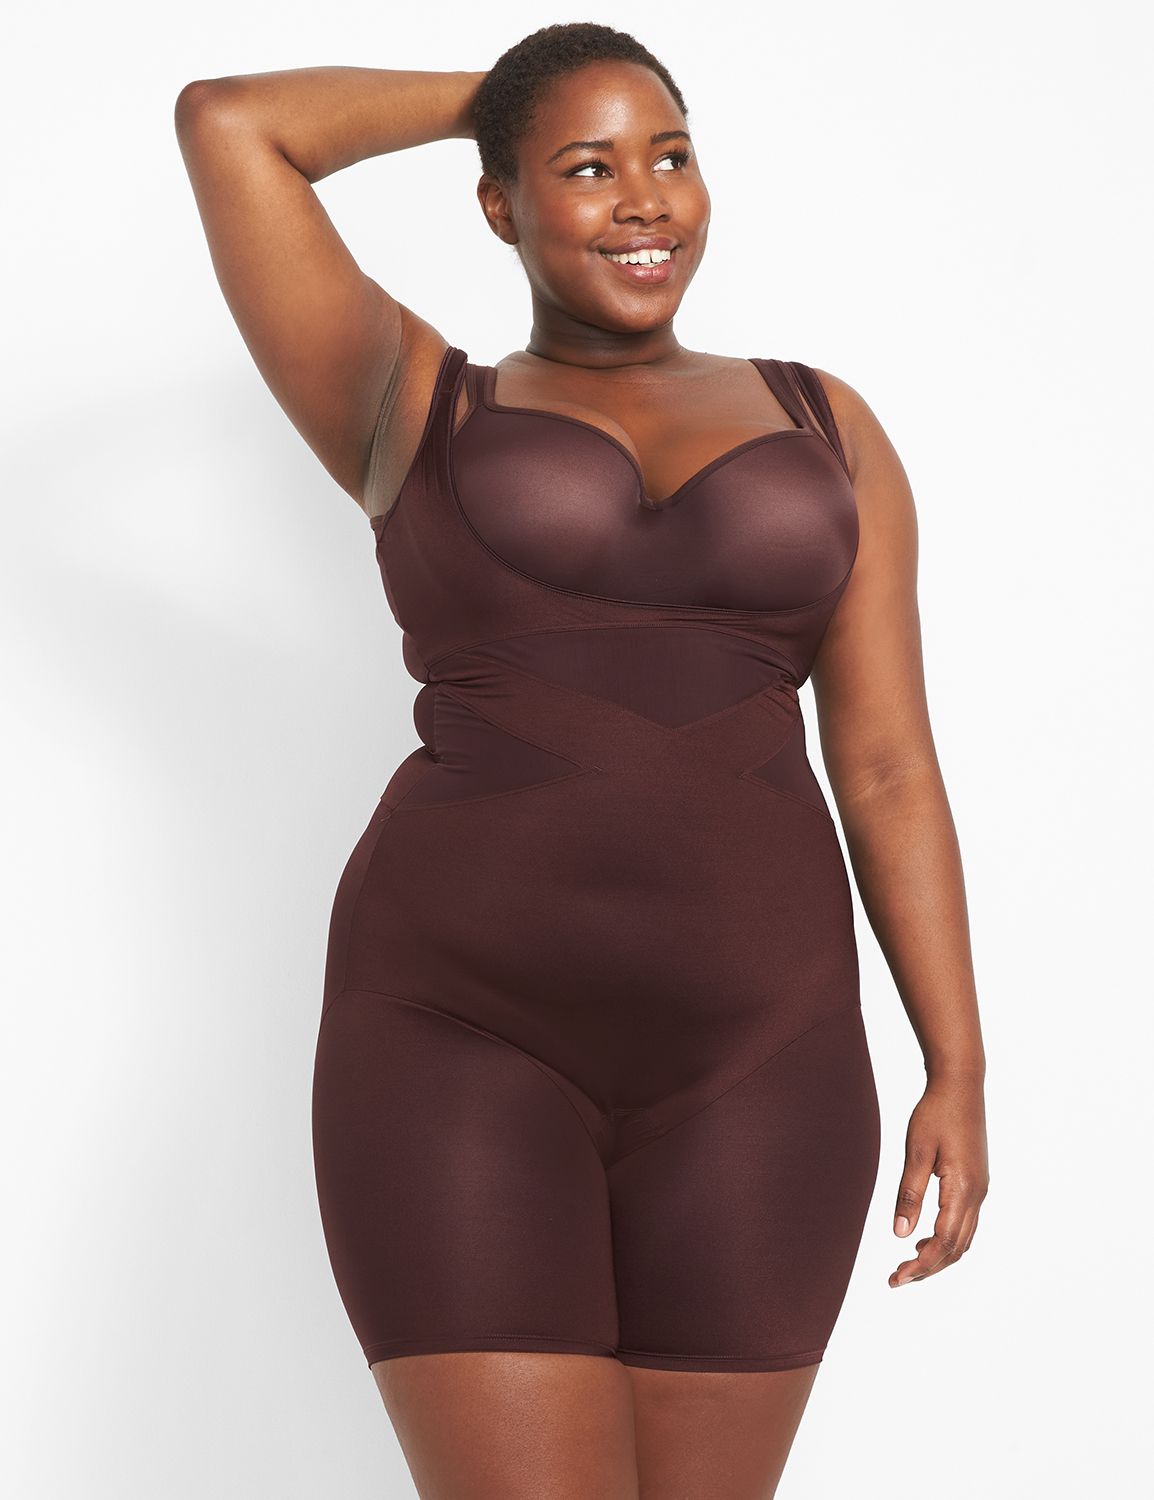 Cacique Black Ultra High Waist Thigh Shaper Plus Size 22/24 Shapewear - $23  - From Misty